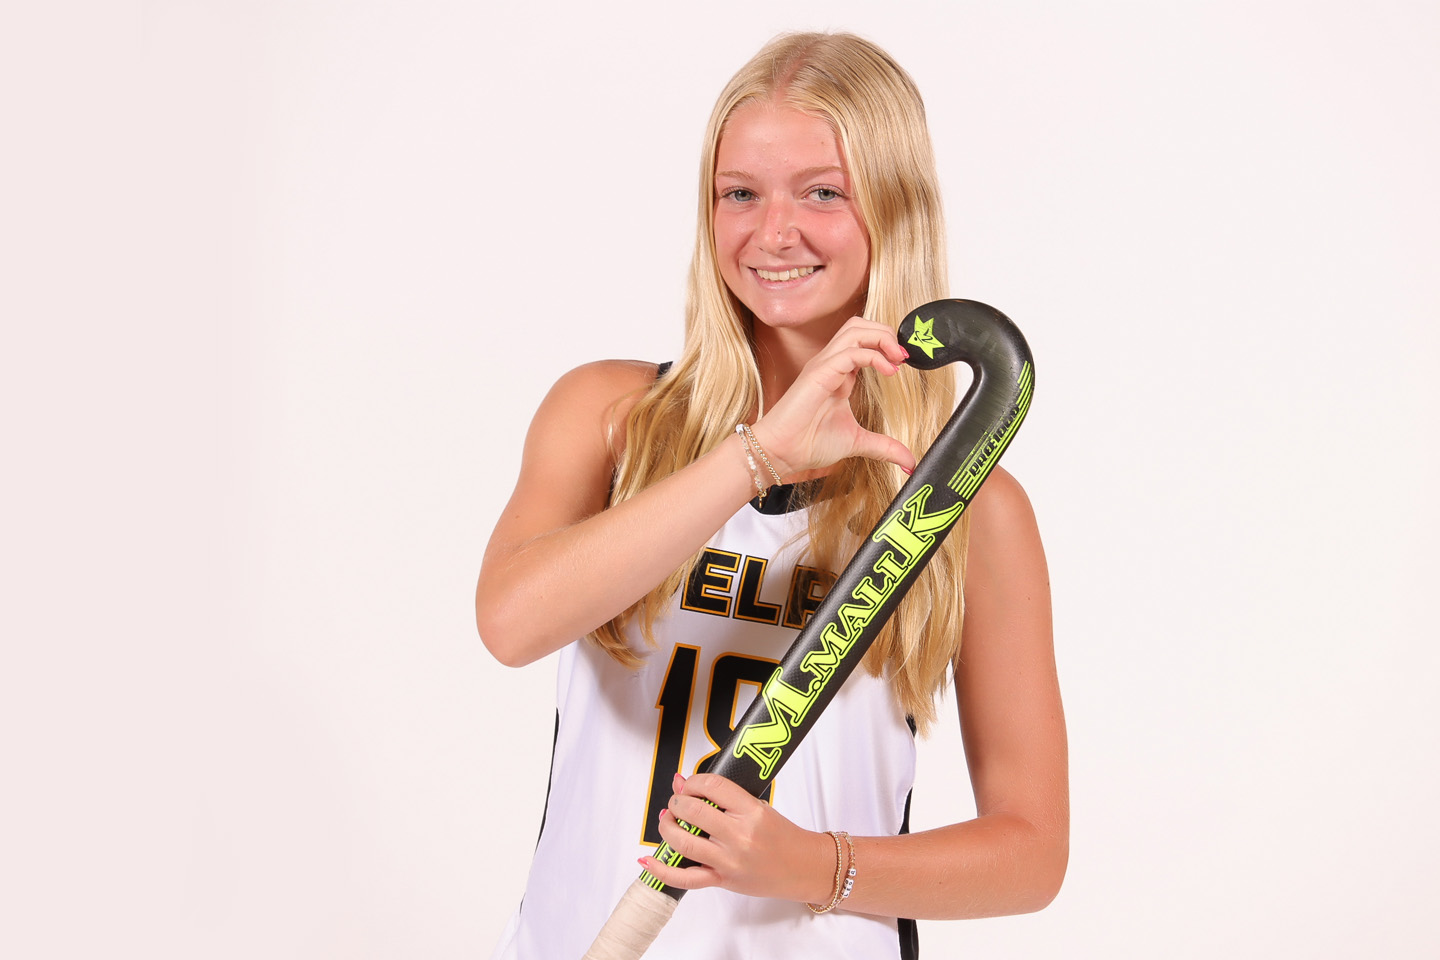 Field hockey player Caroline Beakes, first-year student, exercise science